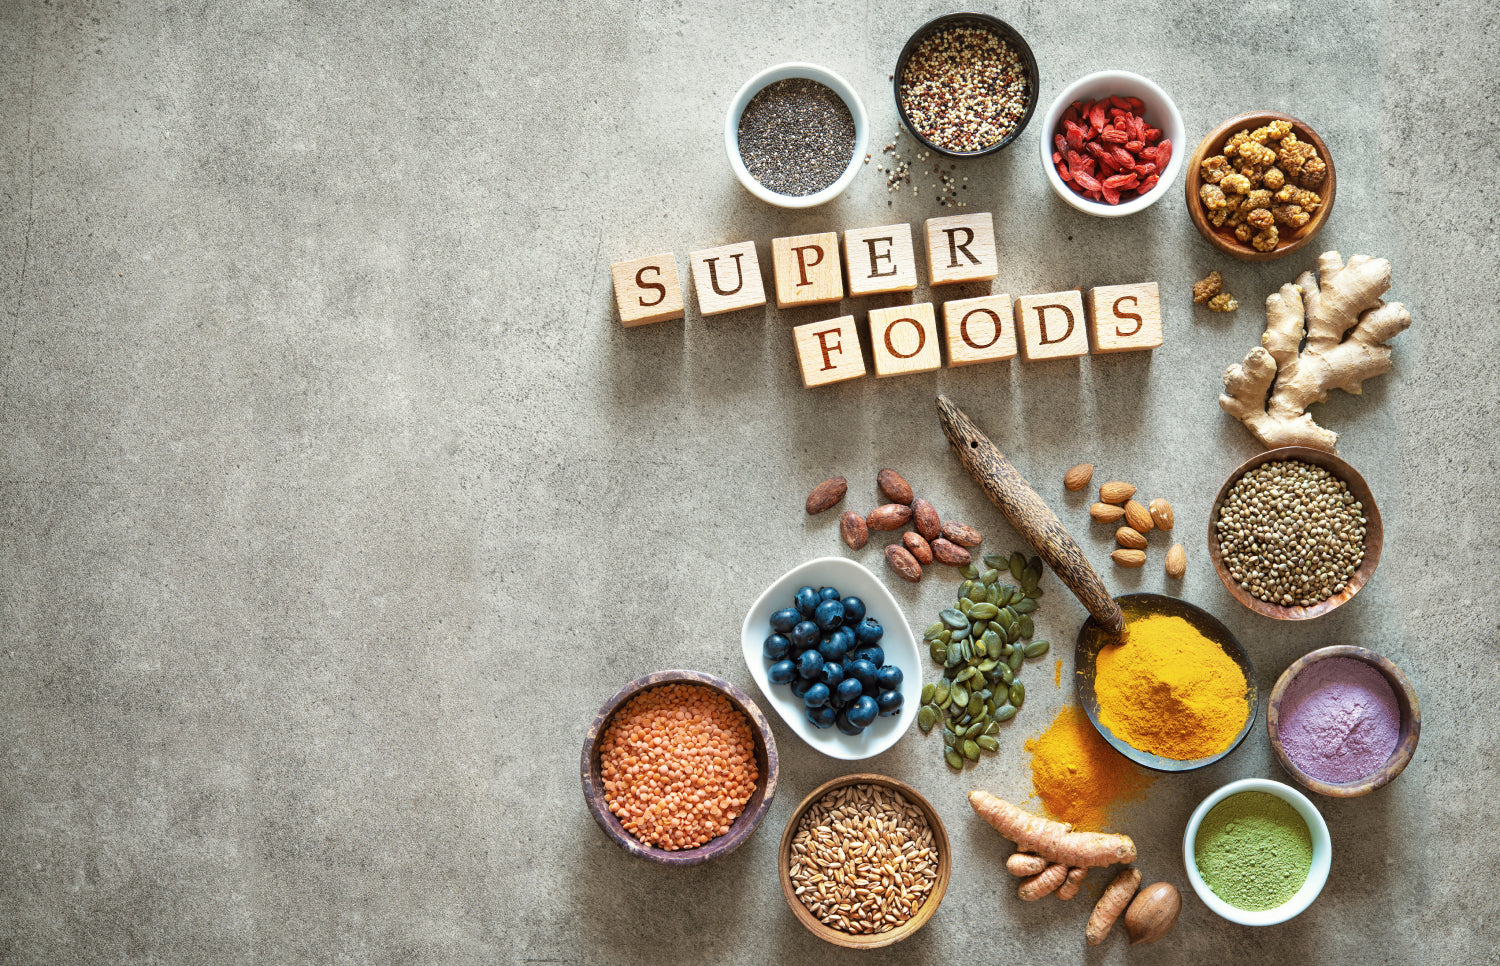 What Are Superfoods? 6 Superfoods To Consume More Of